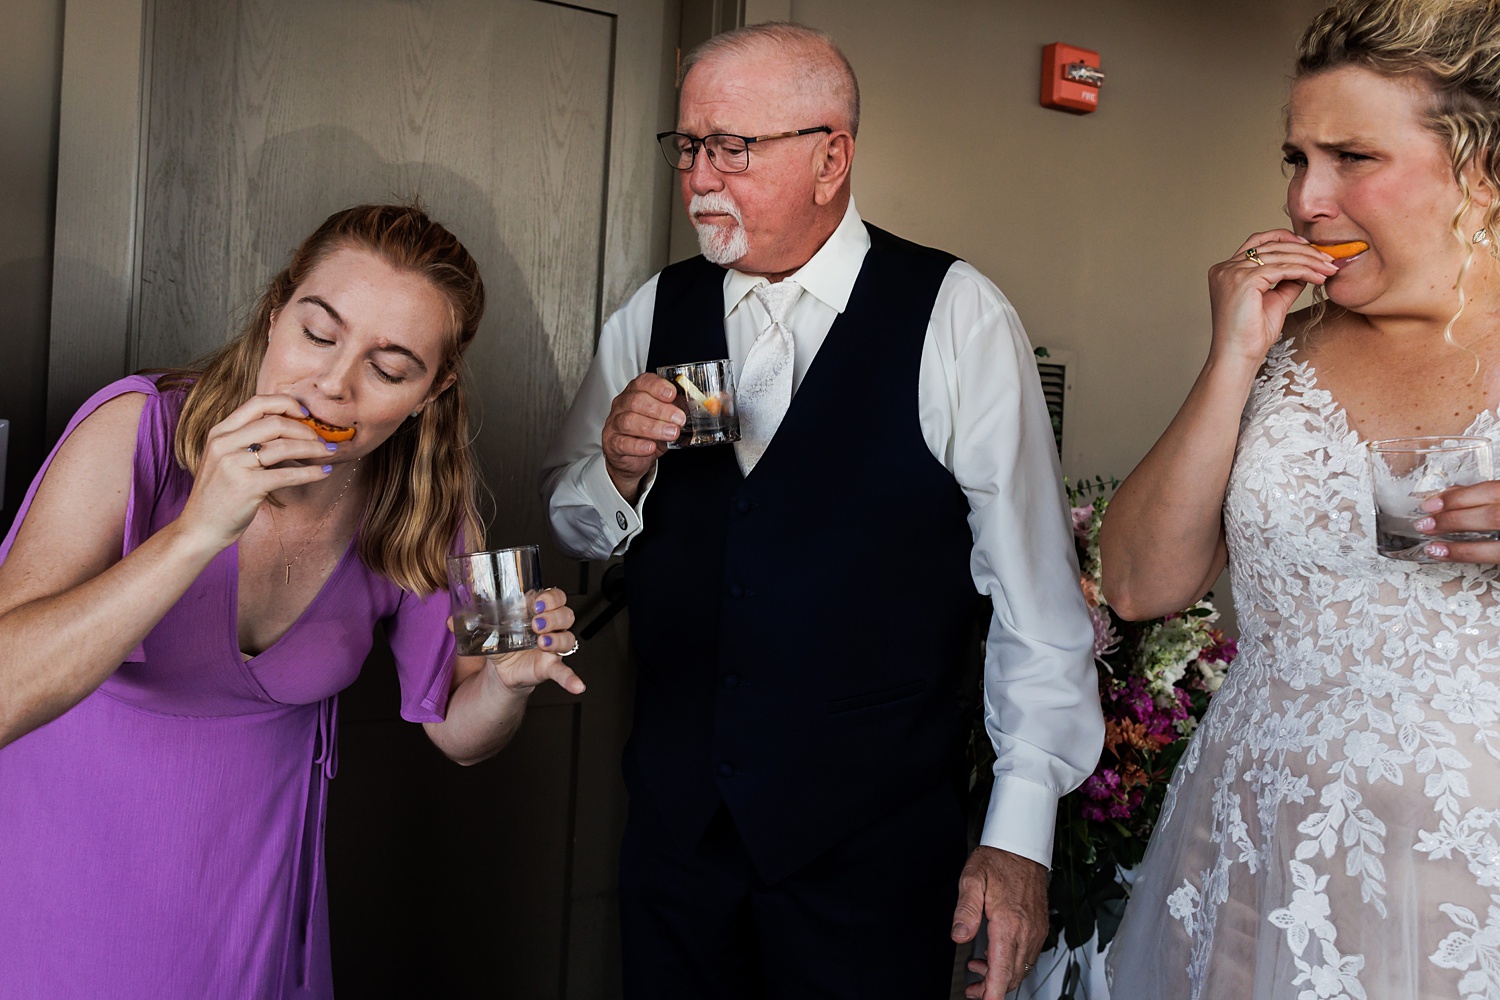 Some shots with family on the wedding day in Maine